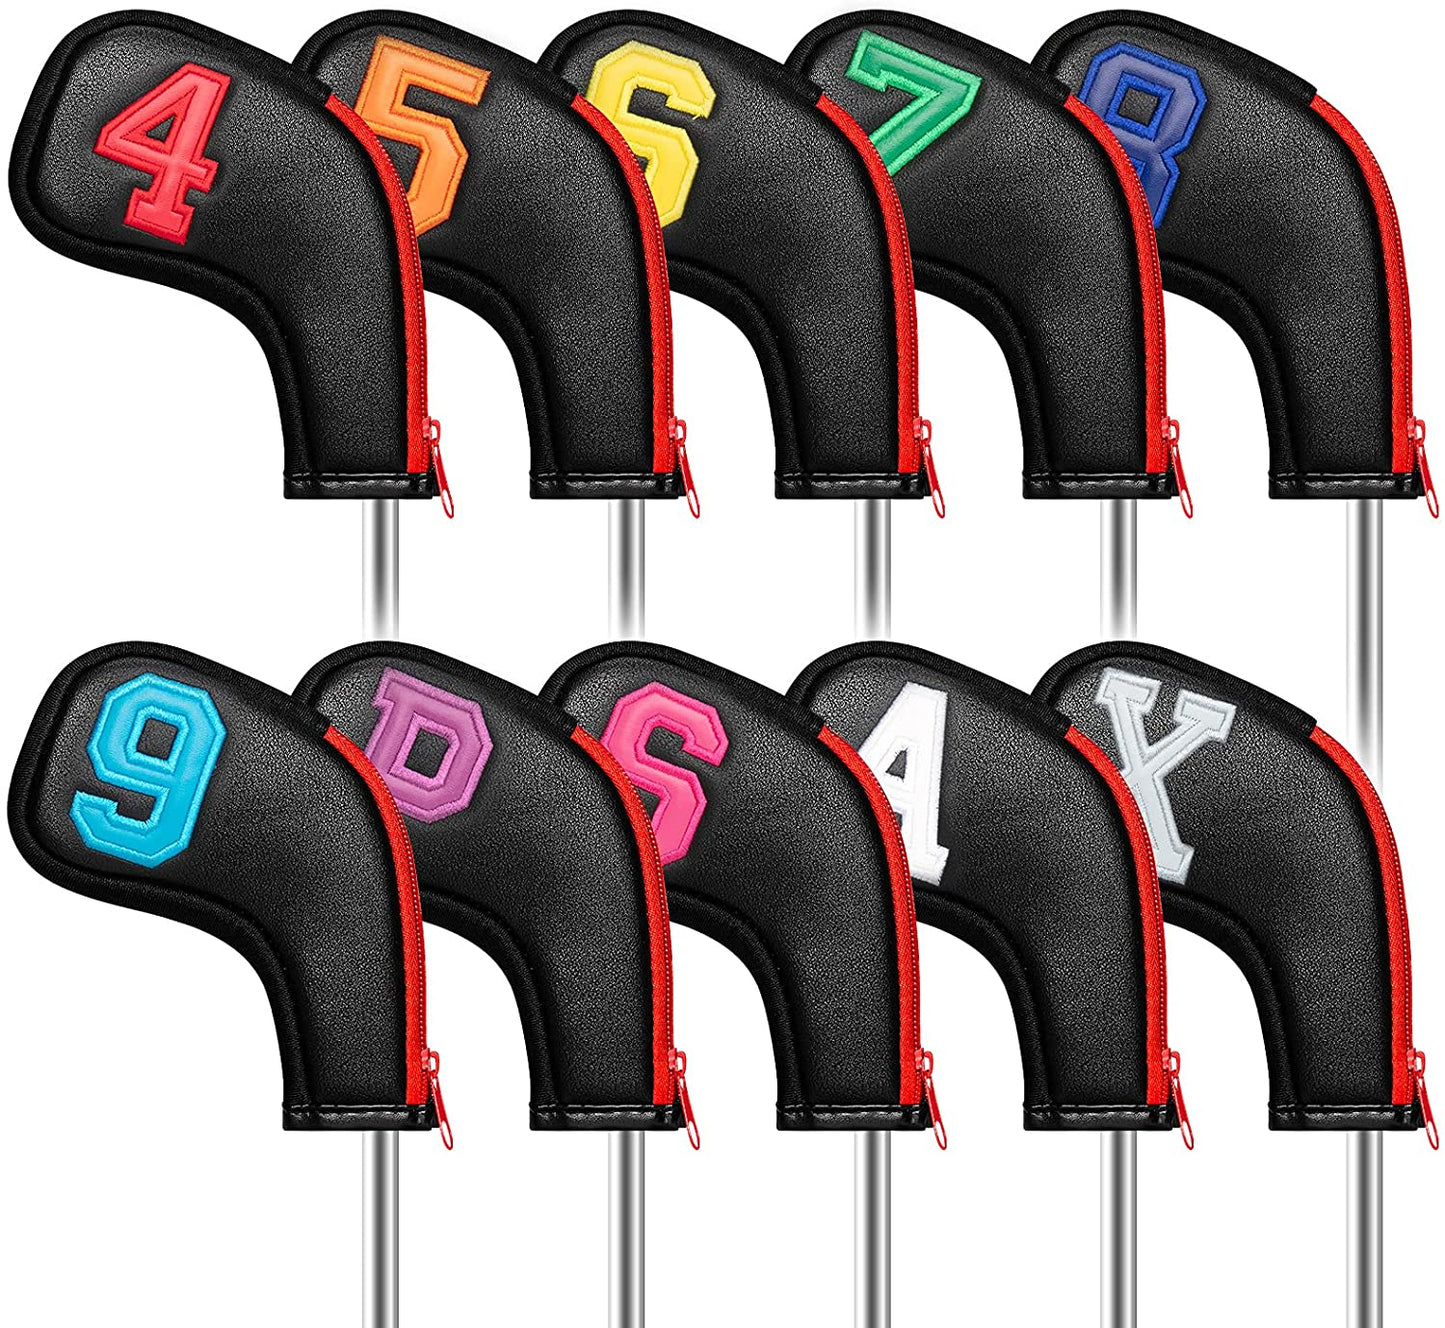 Golf Head Covers for Iron Headcover with Zipper Black Leather 10pcs Set Colorful Number Embroideried PU Leather Waterproof Fit All Brands